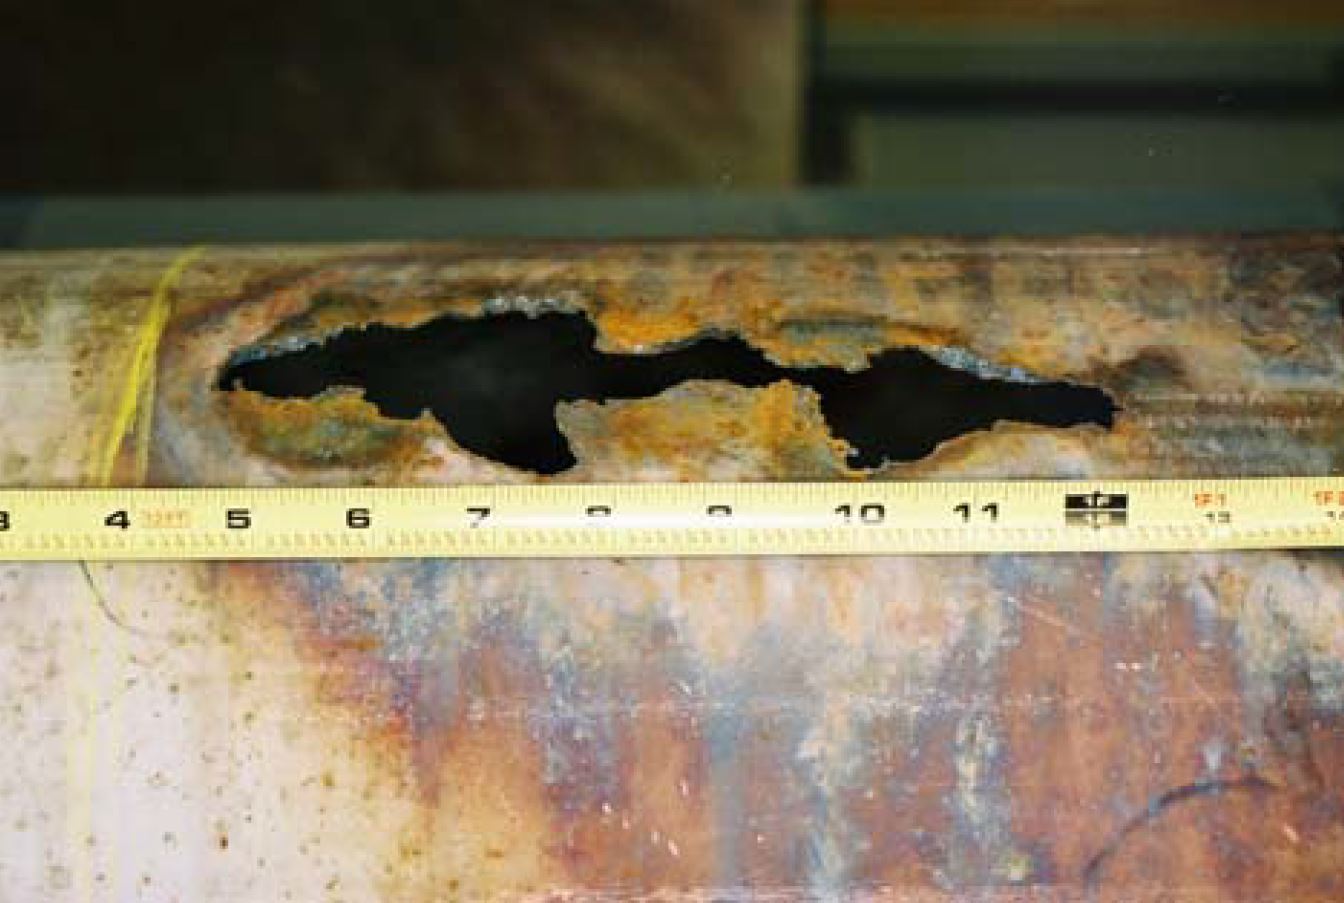 close-up of oxygen fire damage in stainless steel pipe